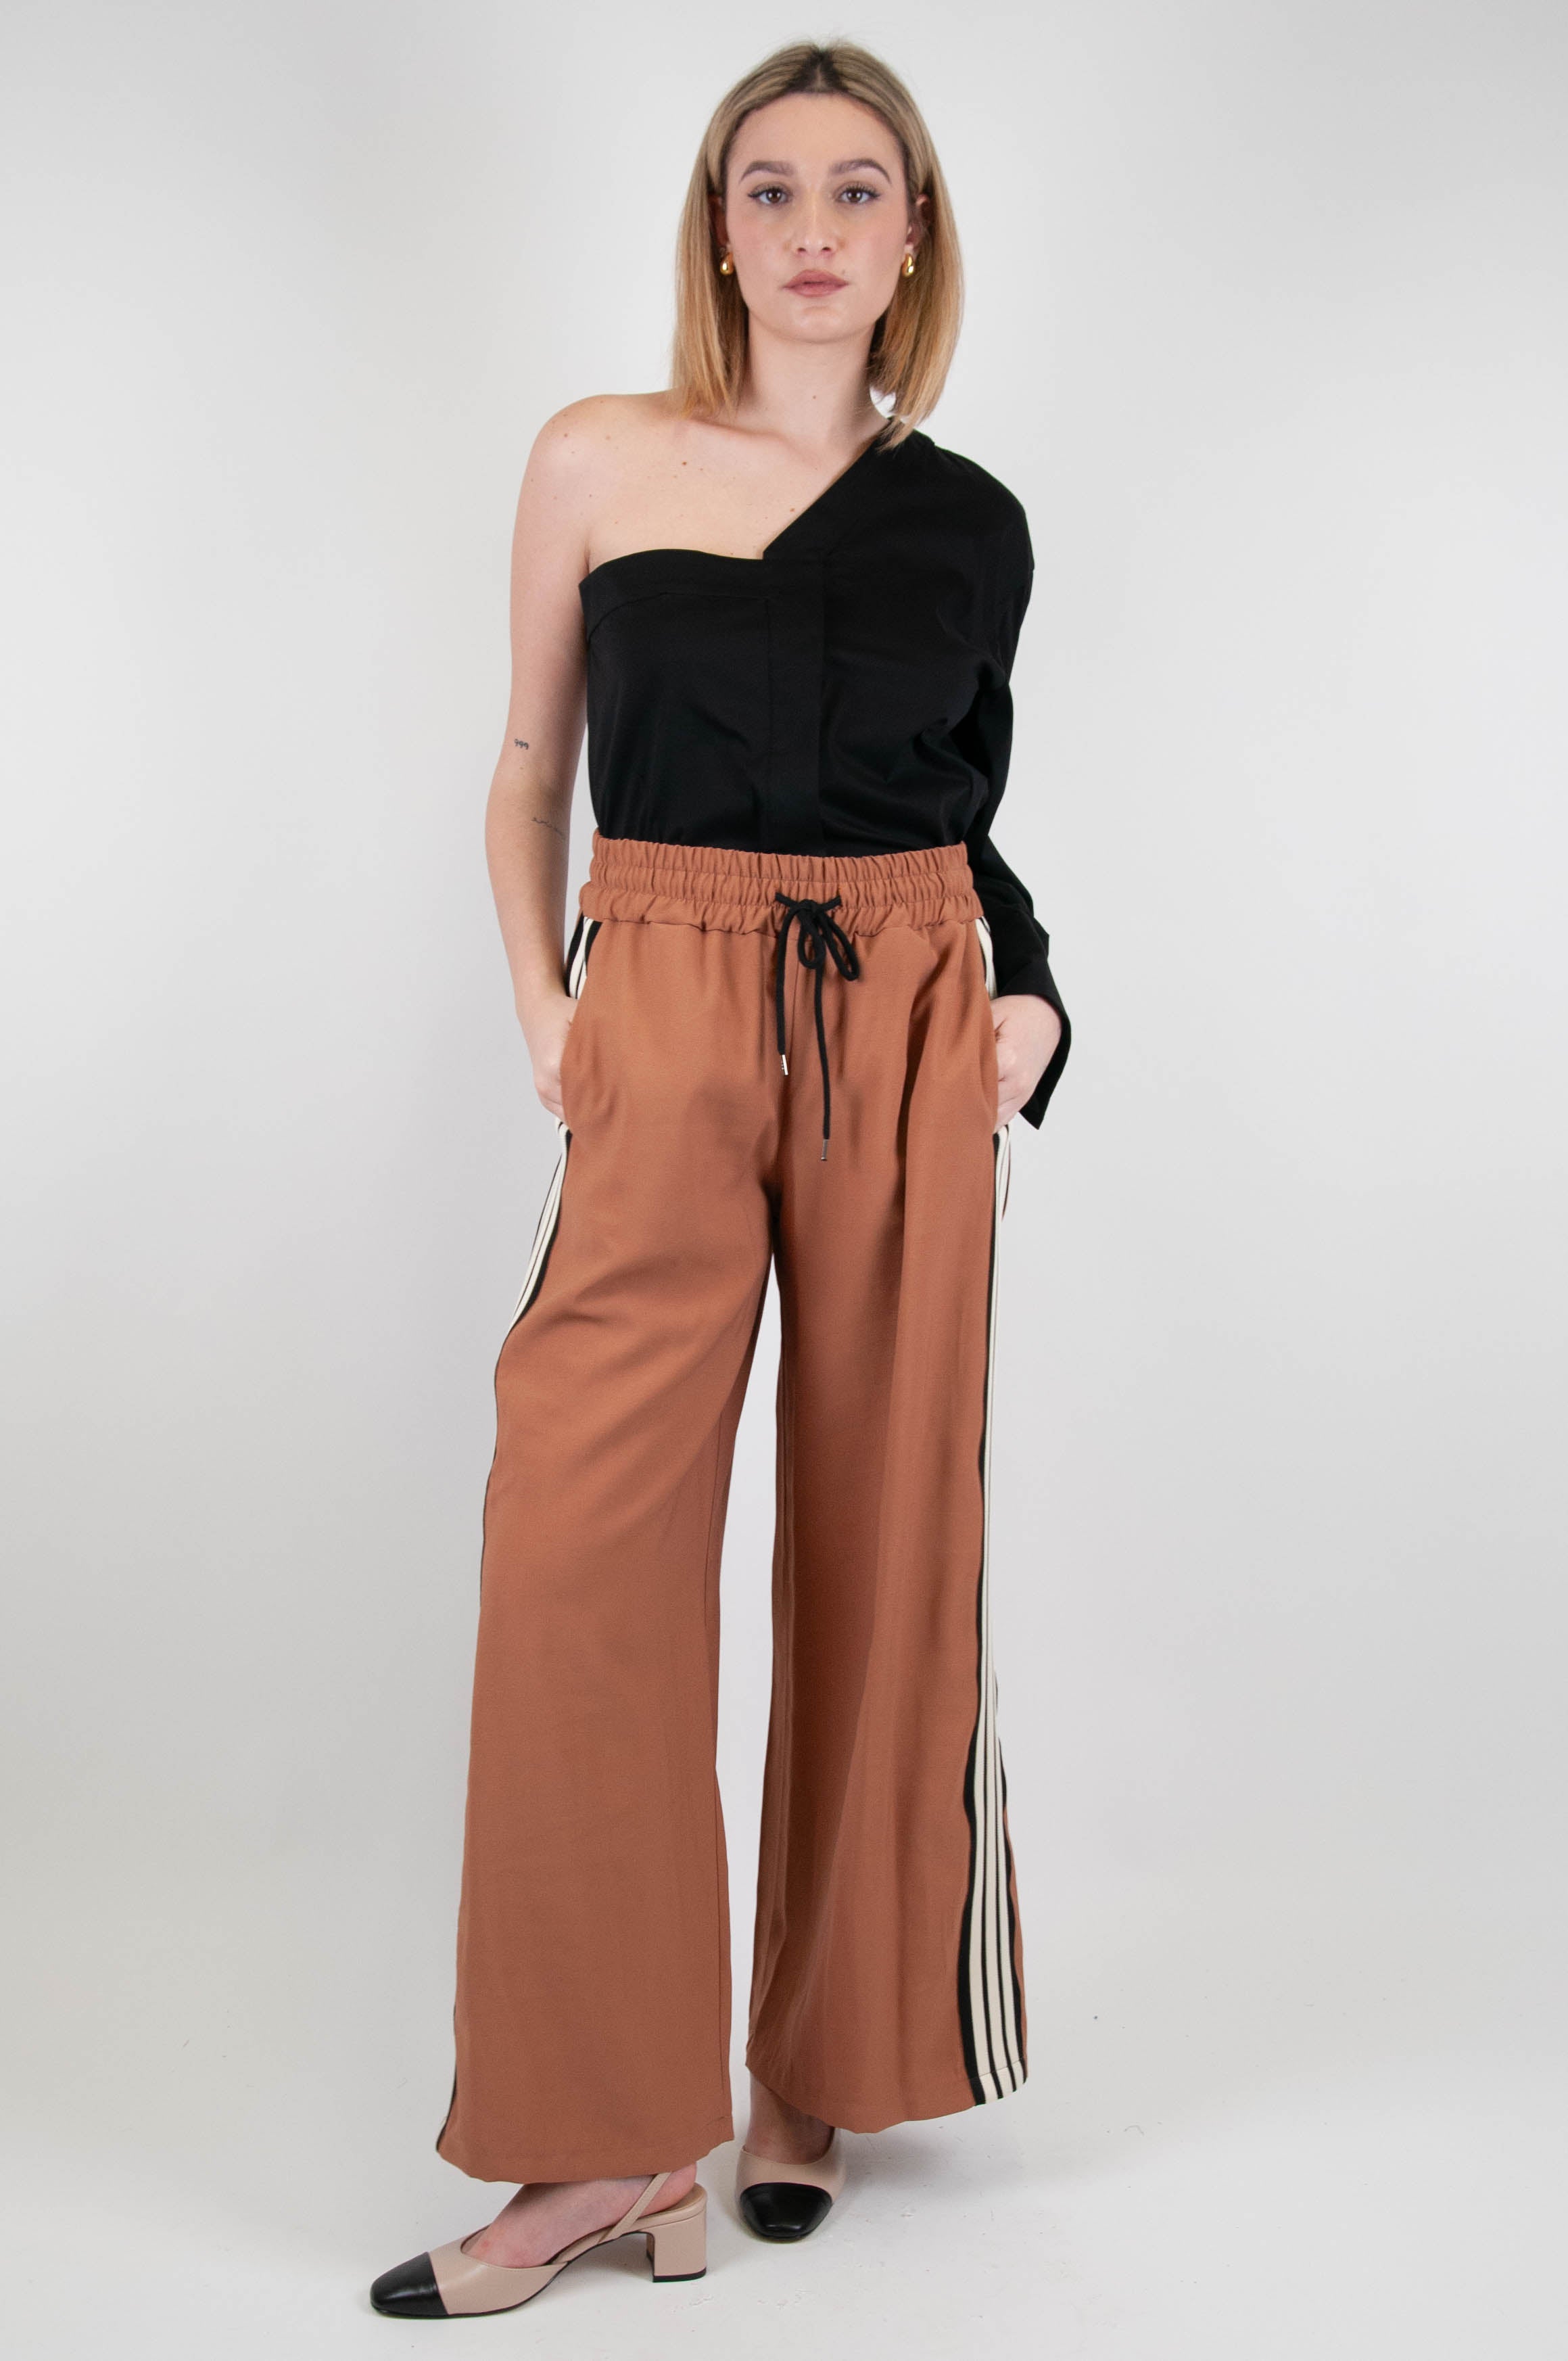 Tension in - Palazzo trousers with contrasting side bands